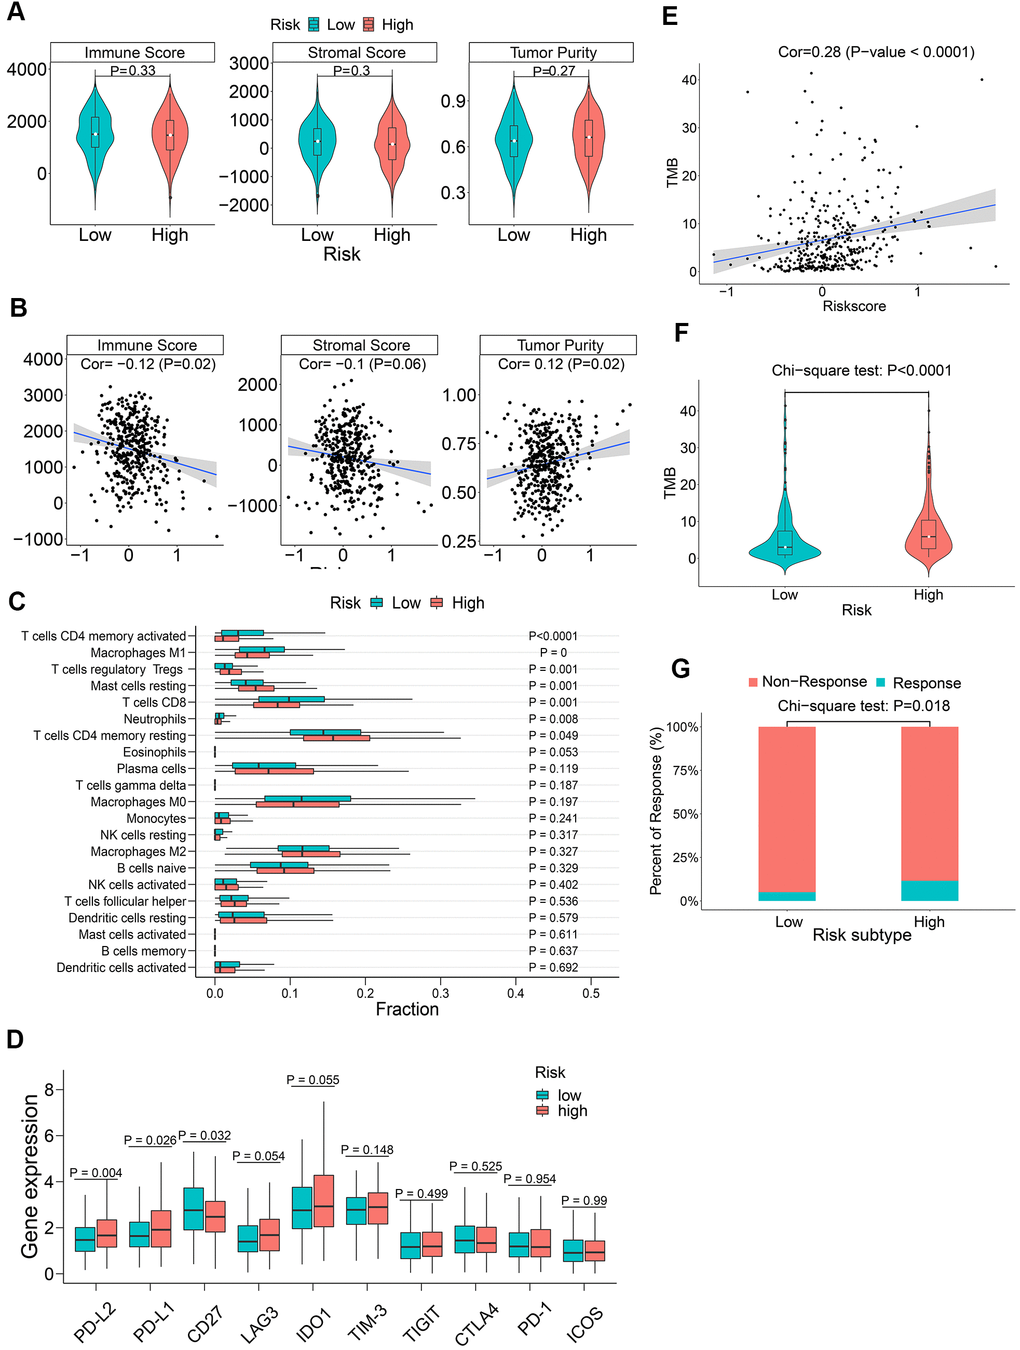 The association between m6A regulatory gene risk signature and tumor immunity of LADC patients. (A) Boxplot shows differences in immune scores, stromal scores and tumor purity between high-risk and low-risk LADC patient groups. (B) Spearman analysis shows the correlation between risk scores and immune microenvironment parameters such as the immune scores, stromal scores and tumor purity. (C) Relative proportions of infiltrating immune cell types in the high-risk and low-risk LADC patient groups. (D) Boxplot shows differences in expression levels of the immune checkpoint proteins between high-risk and low-risk LADC patient groups. (E) Spearman analysis shows correlation between TMB and risk scores. (F) Violin plot shows differences in TMB between high-risk and low-risk LADC patient groups. (G) Box plot shows the response to immune checkpoint therapy in high-risk and low-risk LADC patient groups.